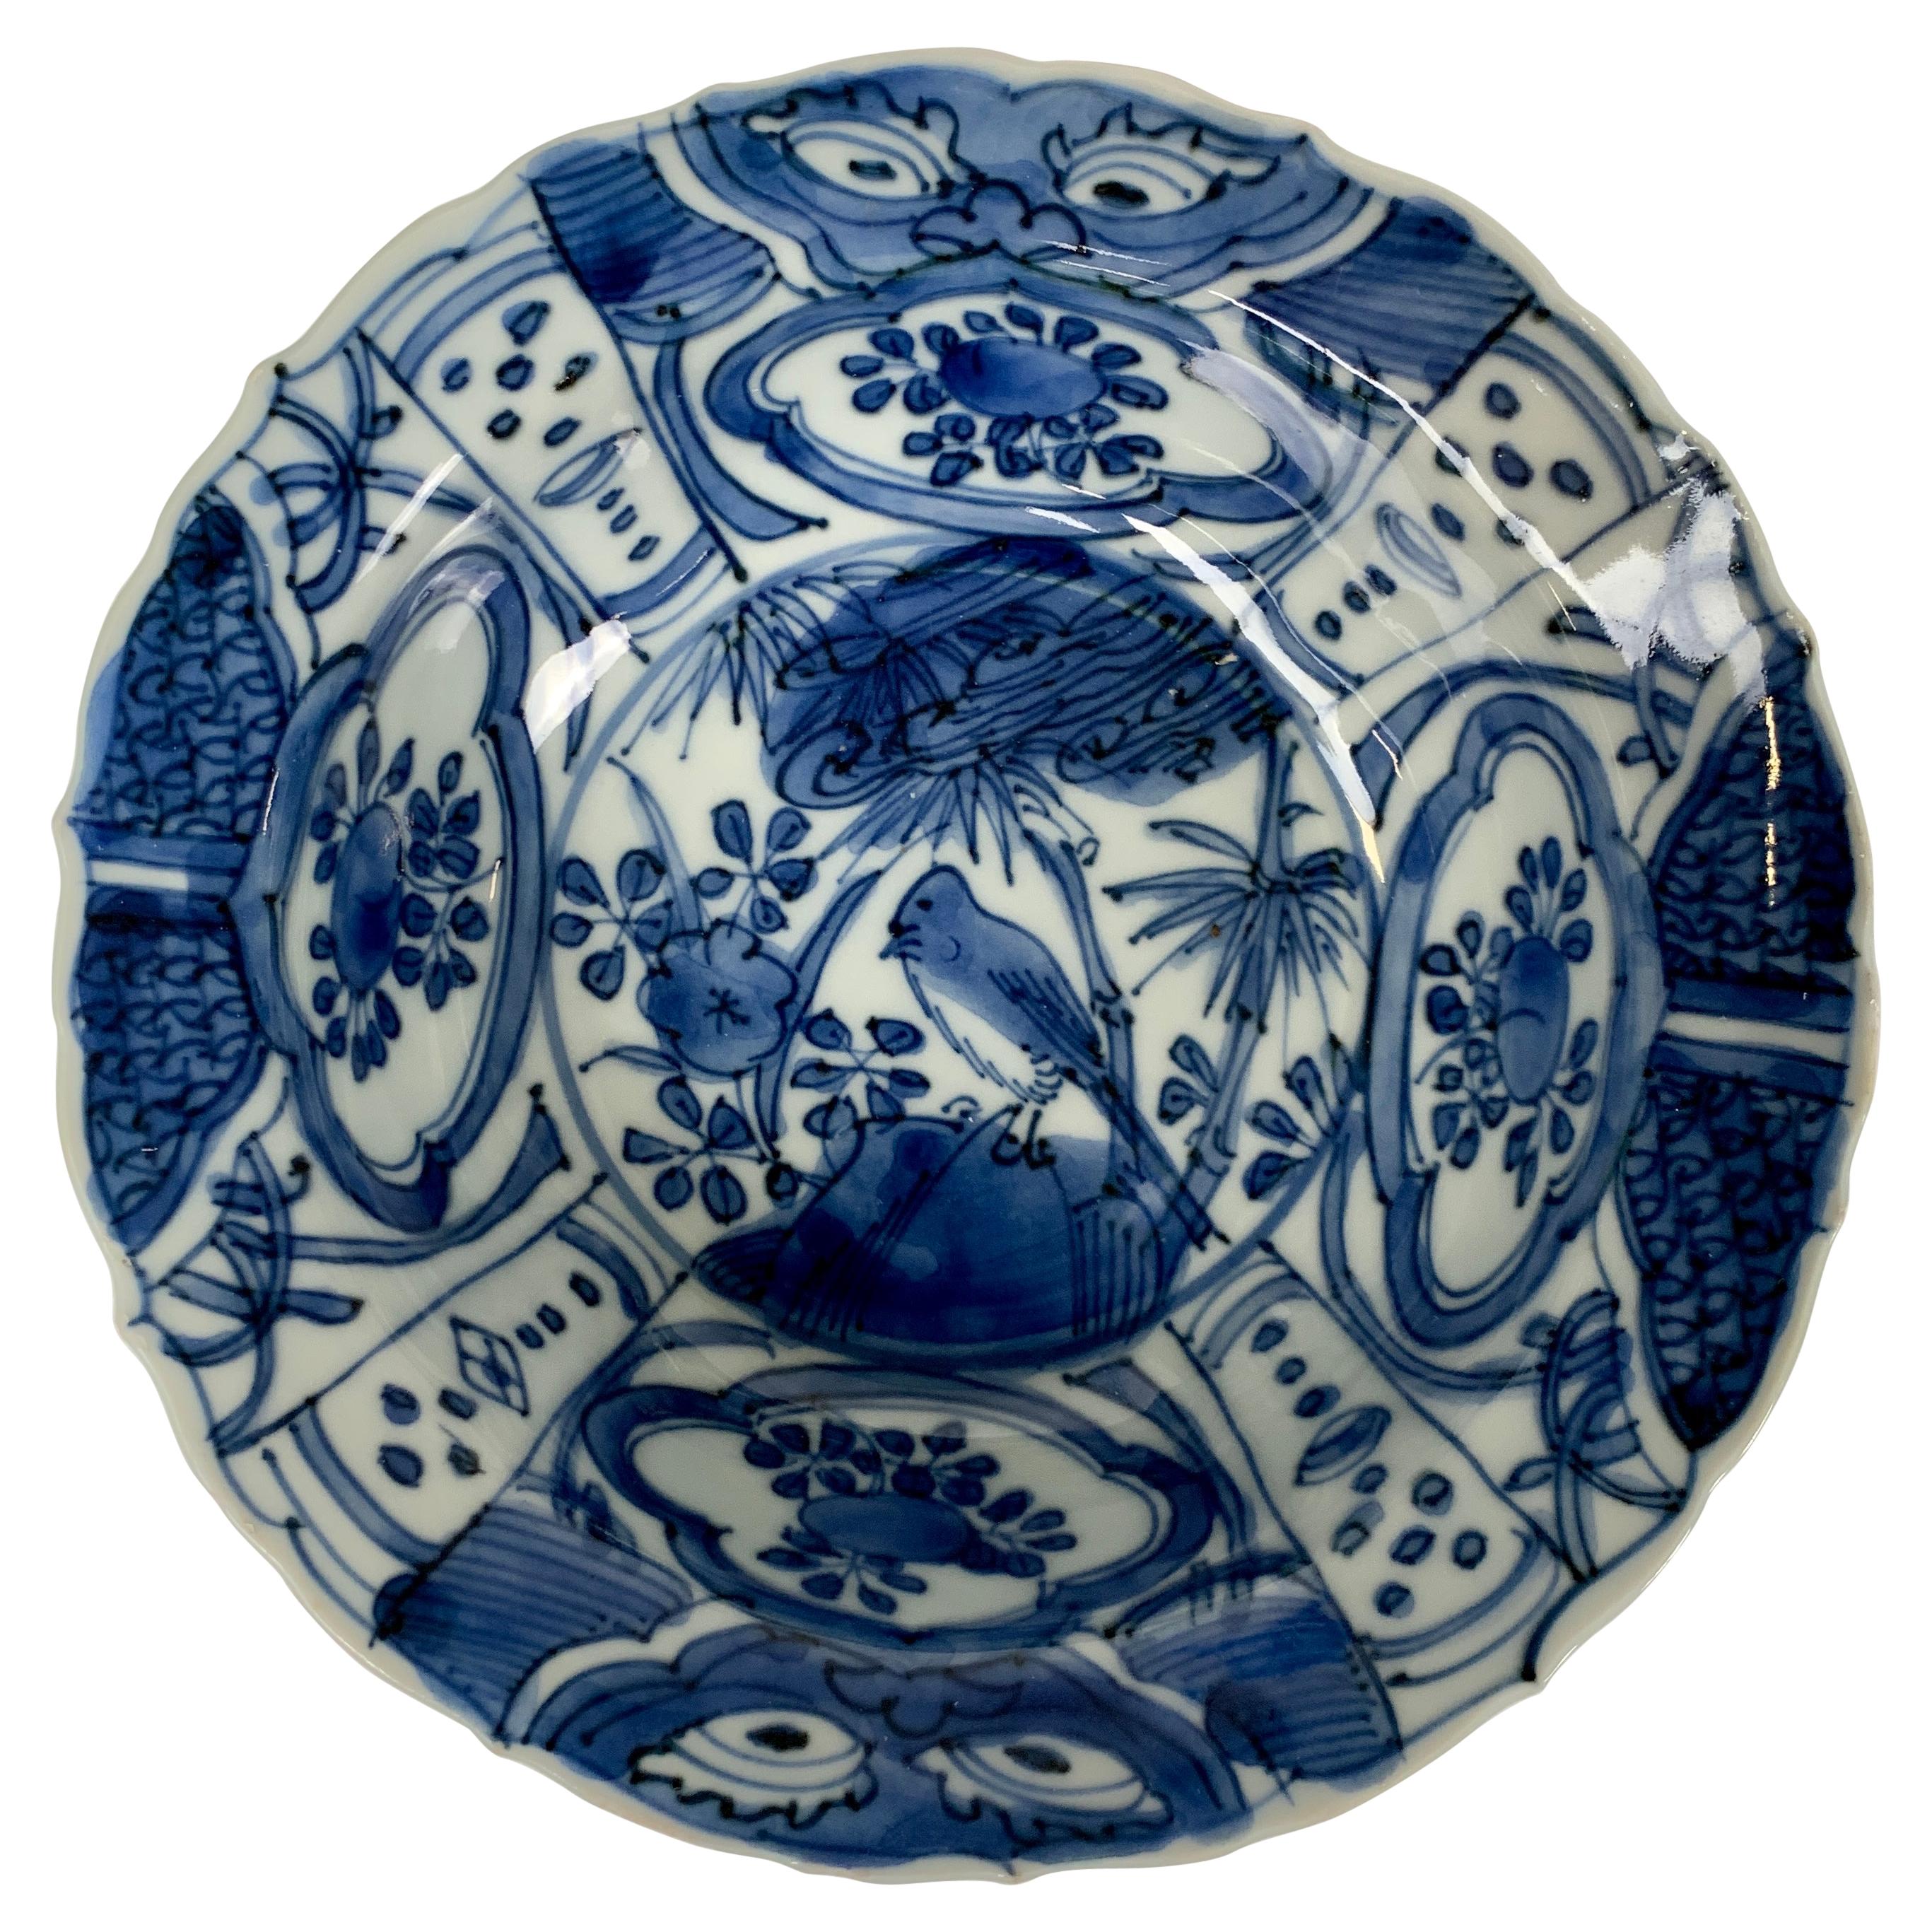 Blue and White Bowl Chinese Porcelain Kraak Made for Export c-1700 Kangxi Period